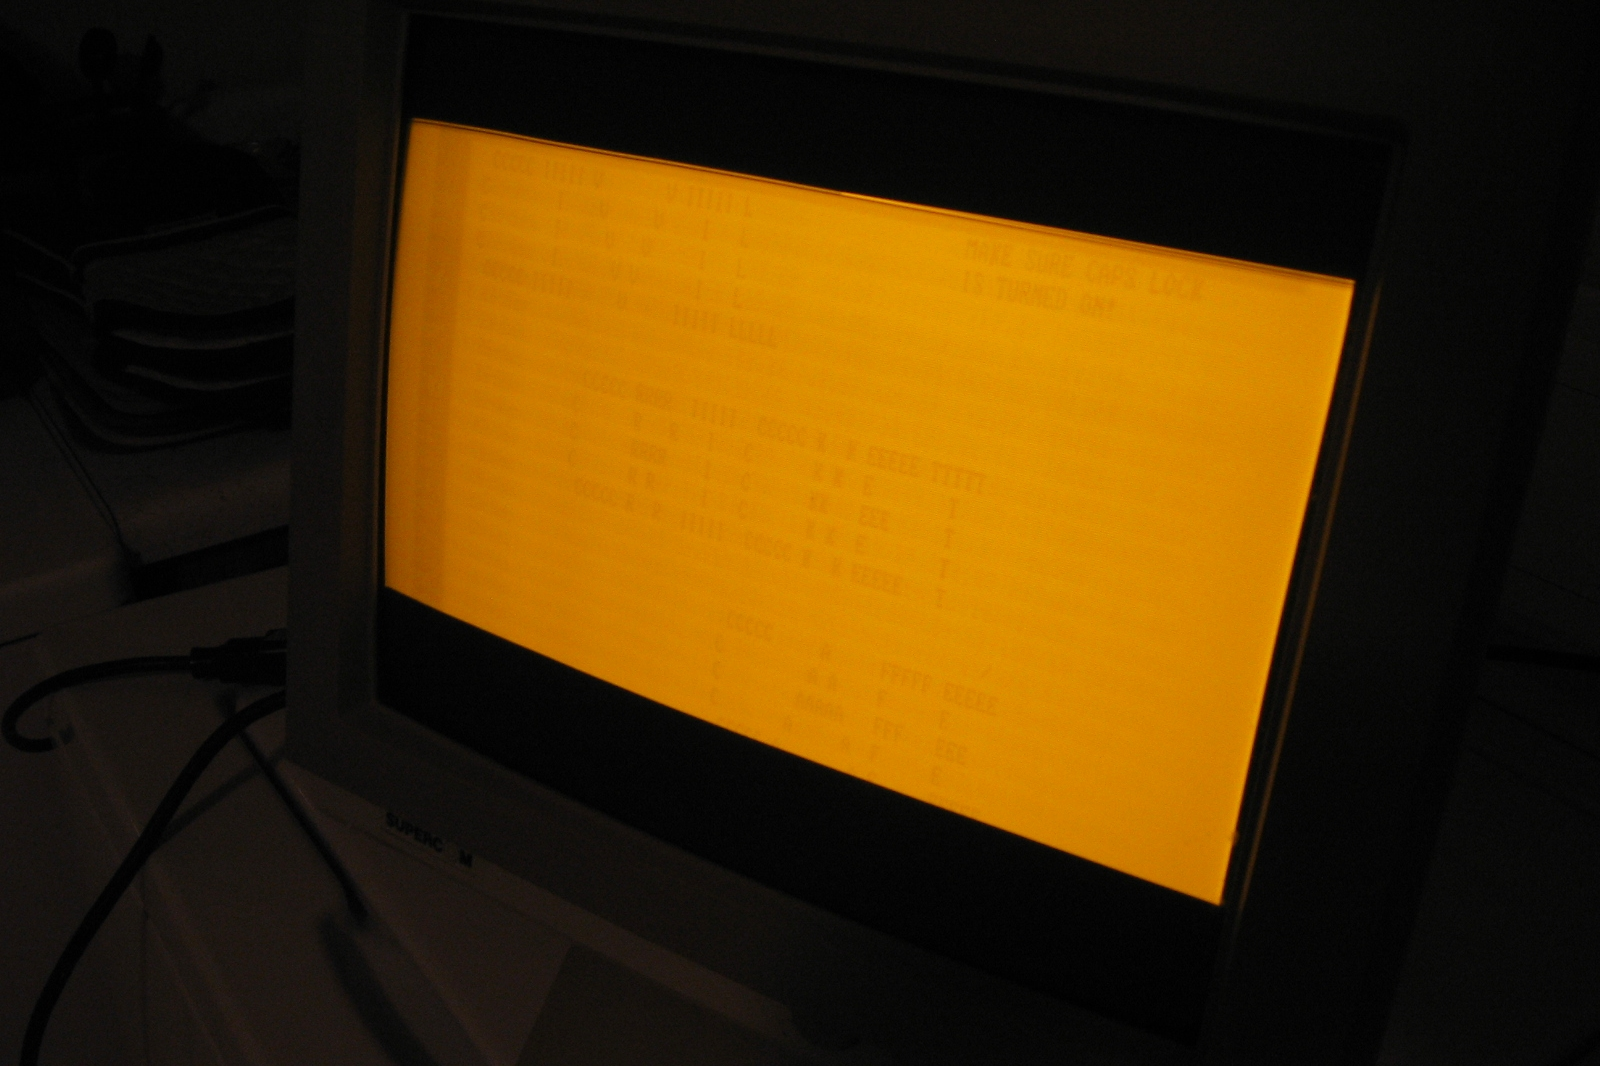 Phosphor burn-in (“screen burn”) visible on an amber monochrome CRT computer monitor.